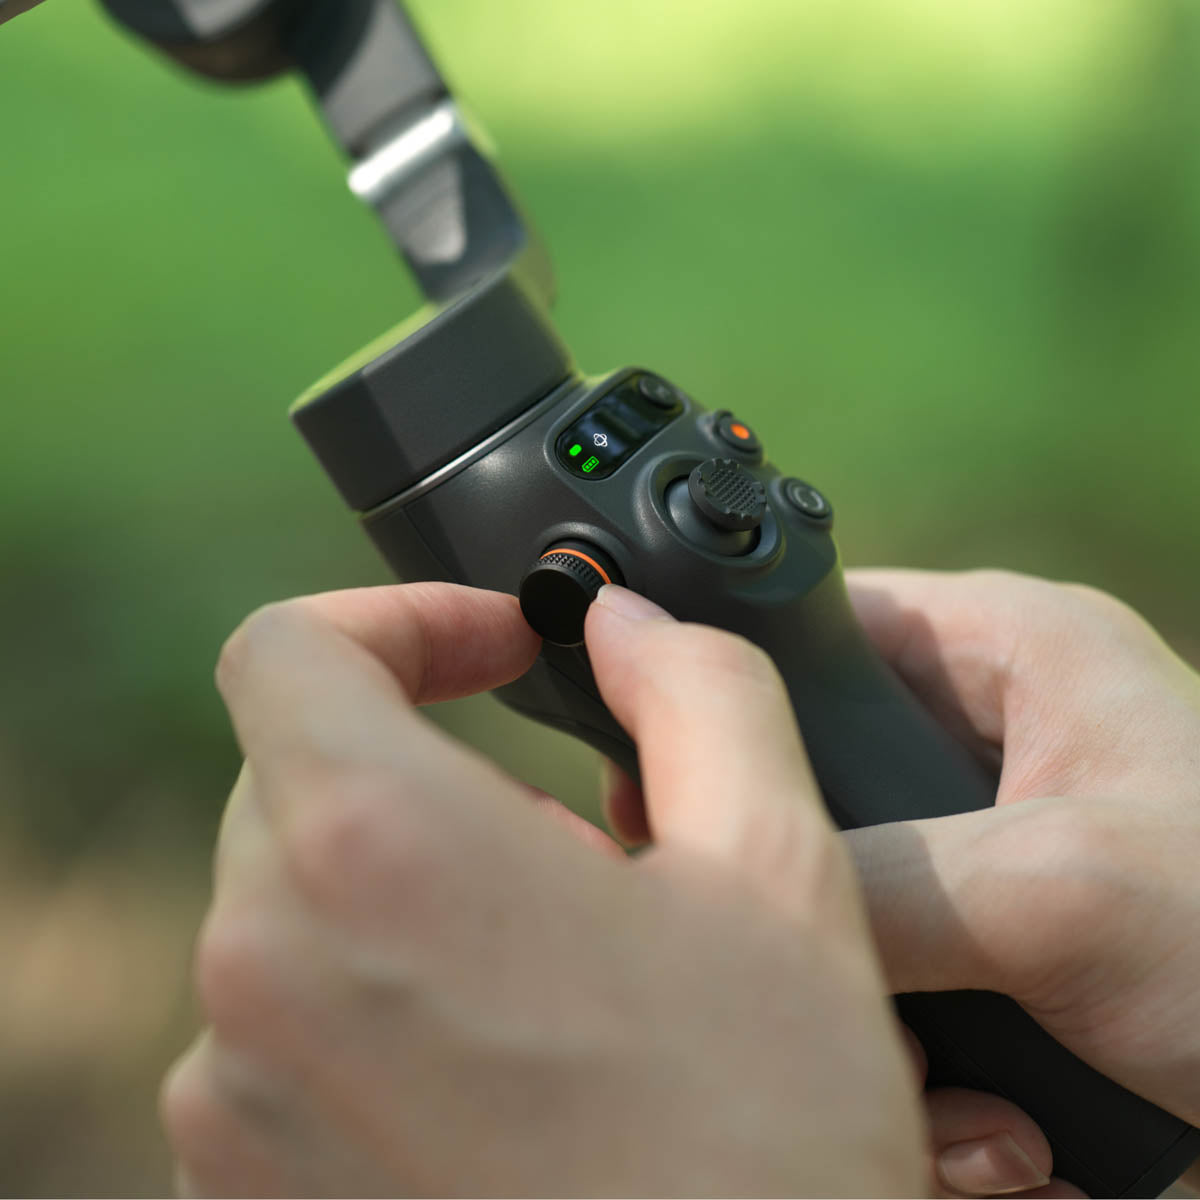 How to use the DJI OSMO MOBILE 6 